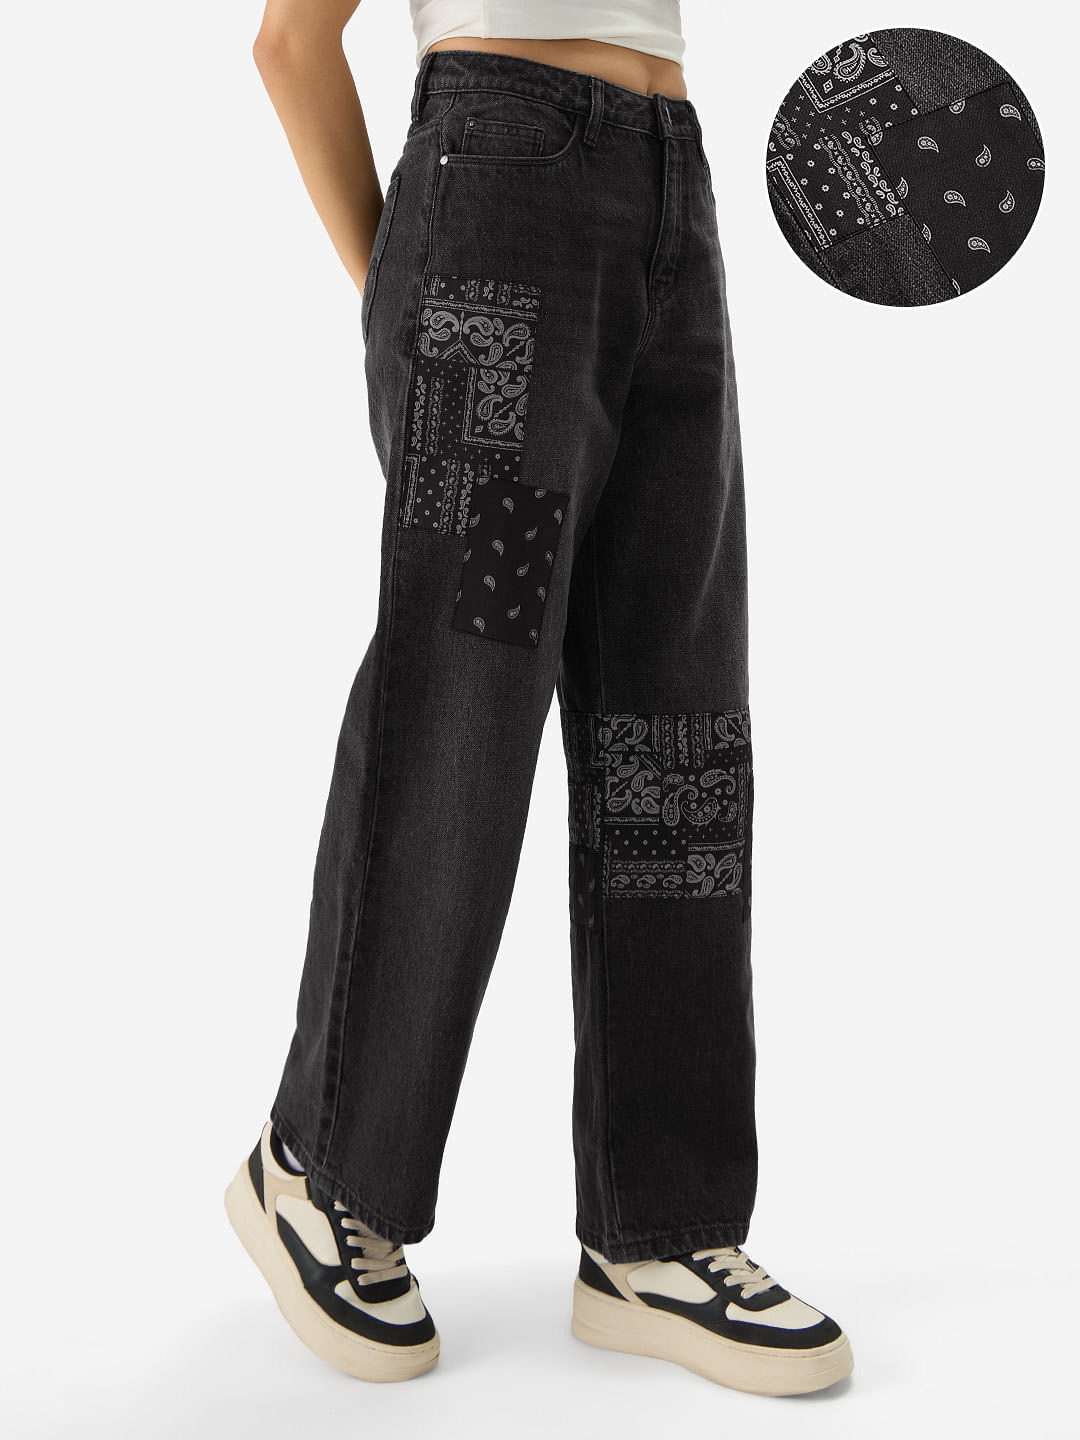 The Souled Store | Women's Denim Indie Black Patched Jeans